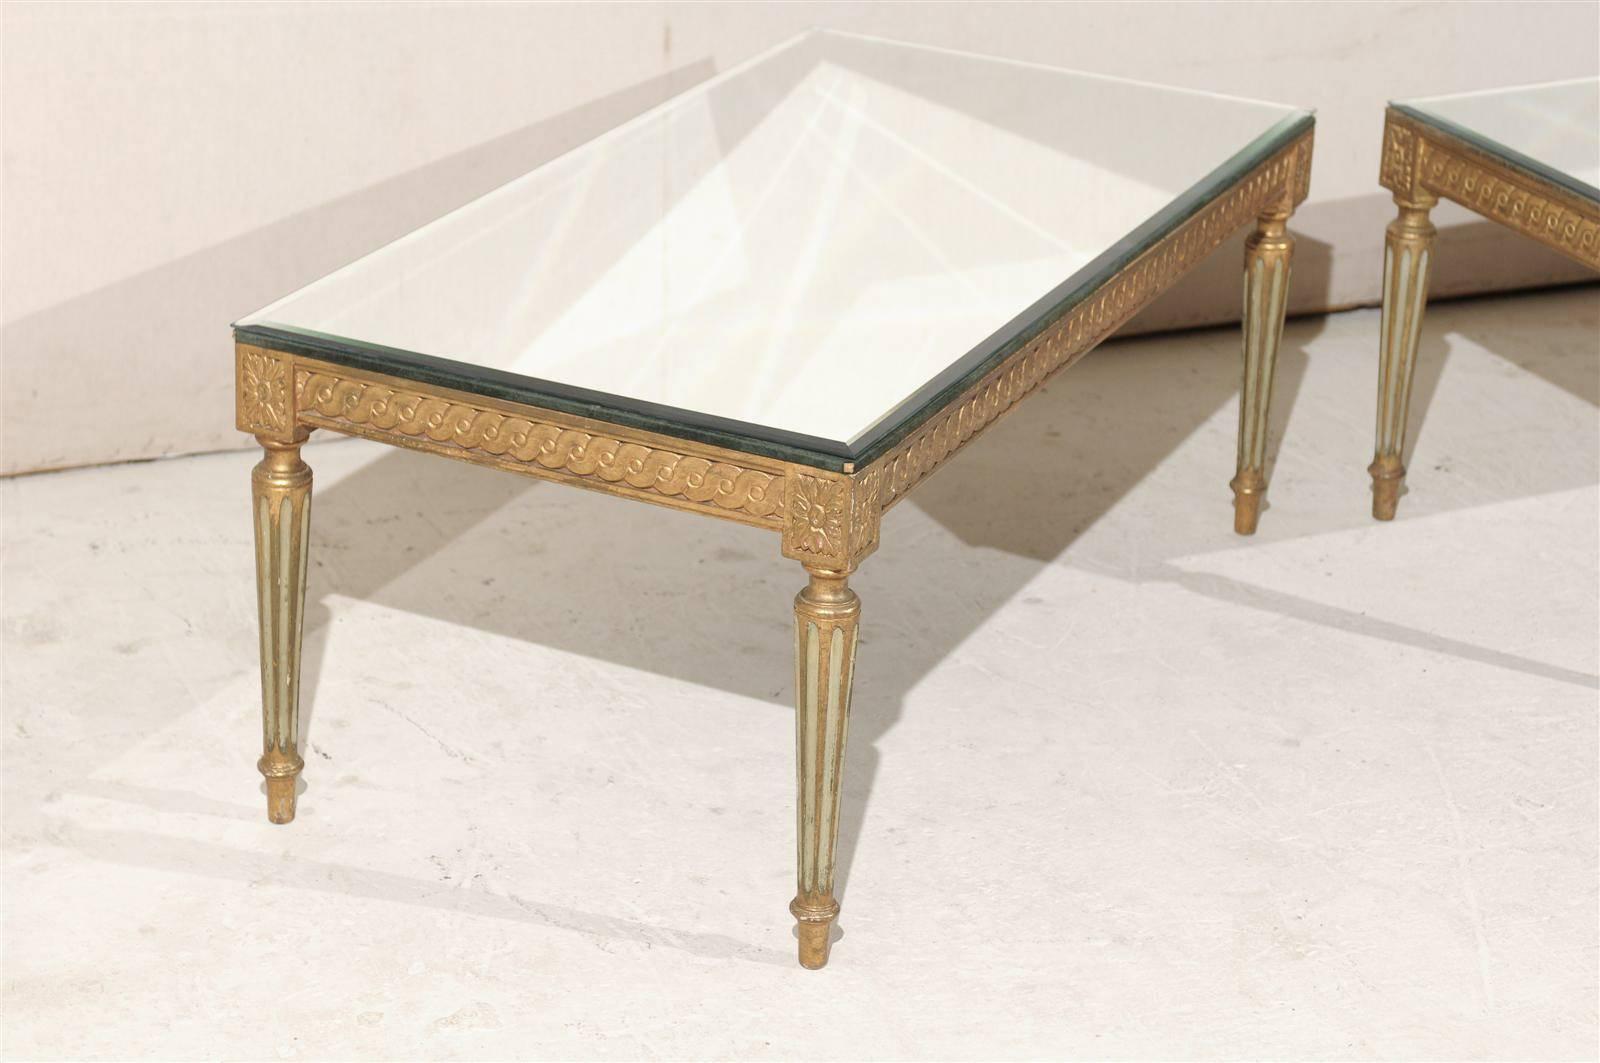 20th Century French Louis XVI Style Gilded and Painted Coffee Table with Mirrored Top